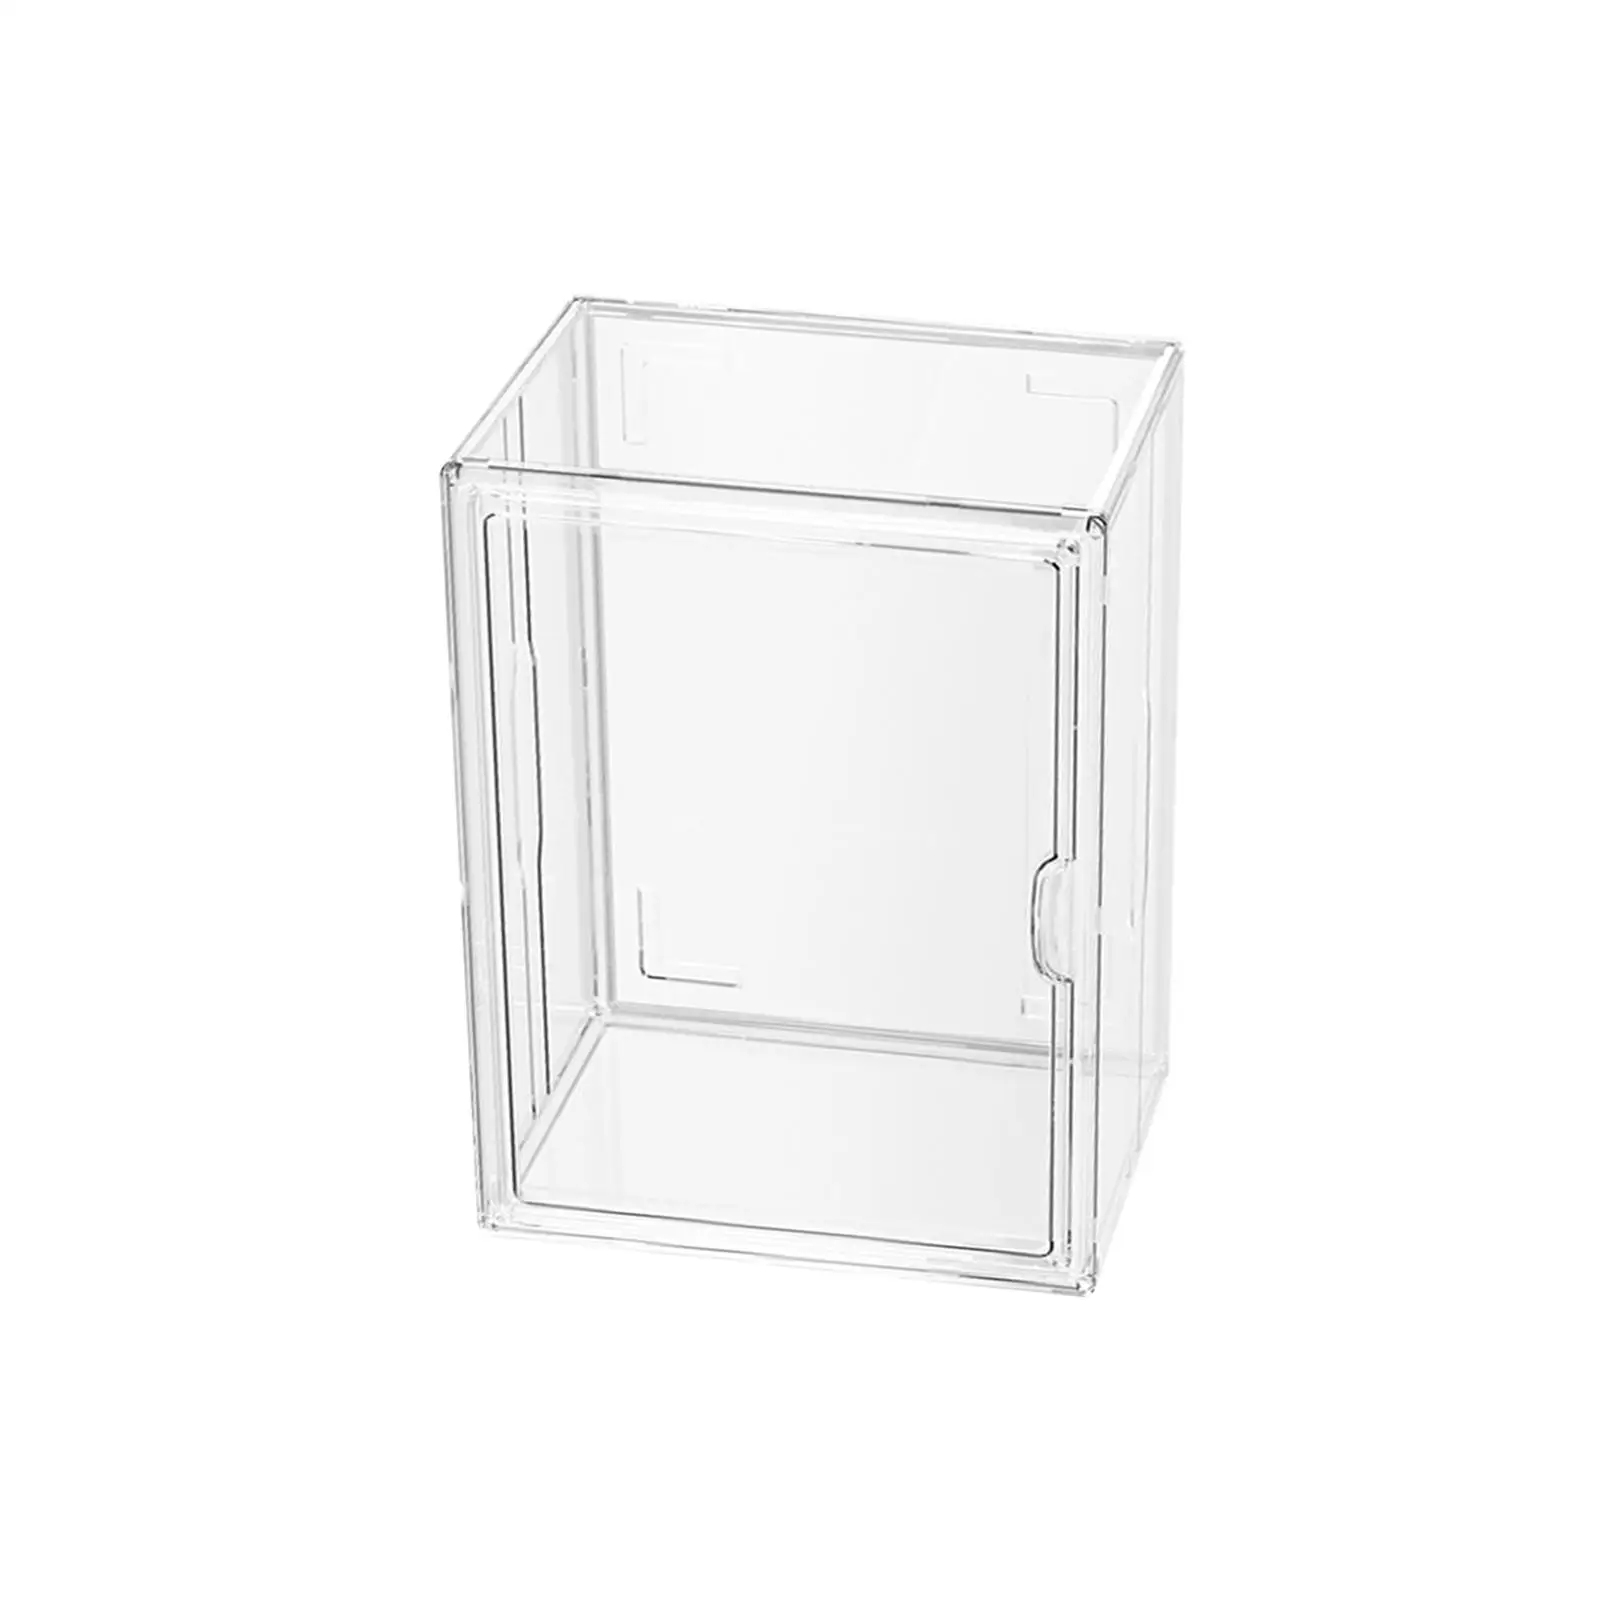 Clear Display Case Dustproof Storage Holder Cube Organizer Decoration Shelf Stand Showcase for Action Figure Toys Collectibles